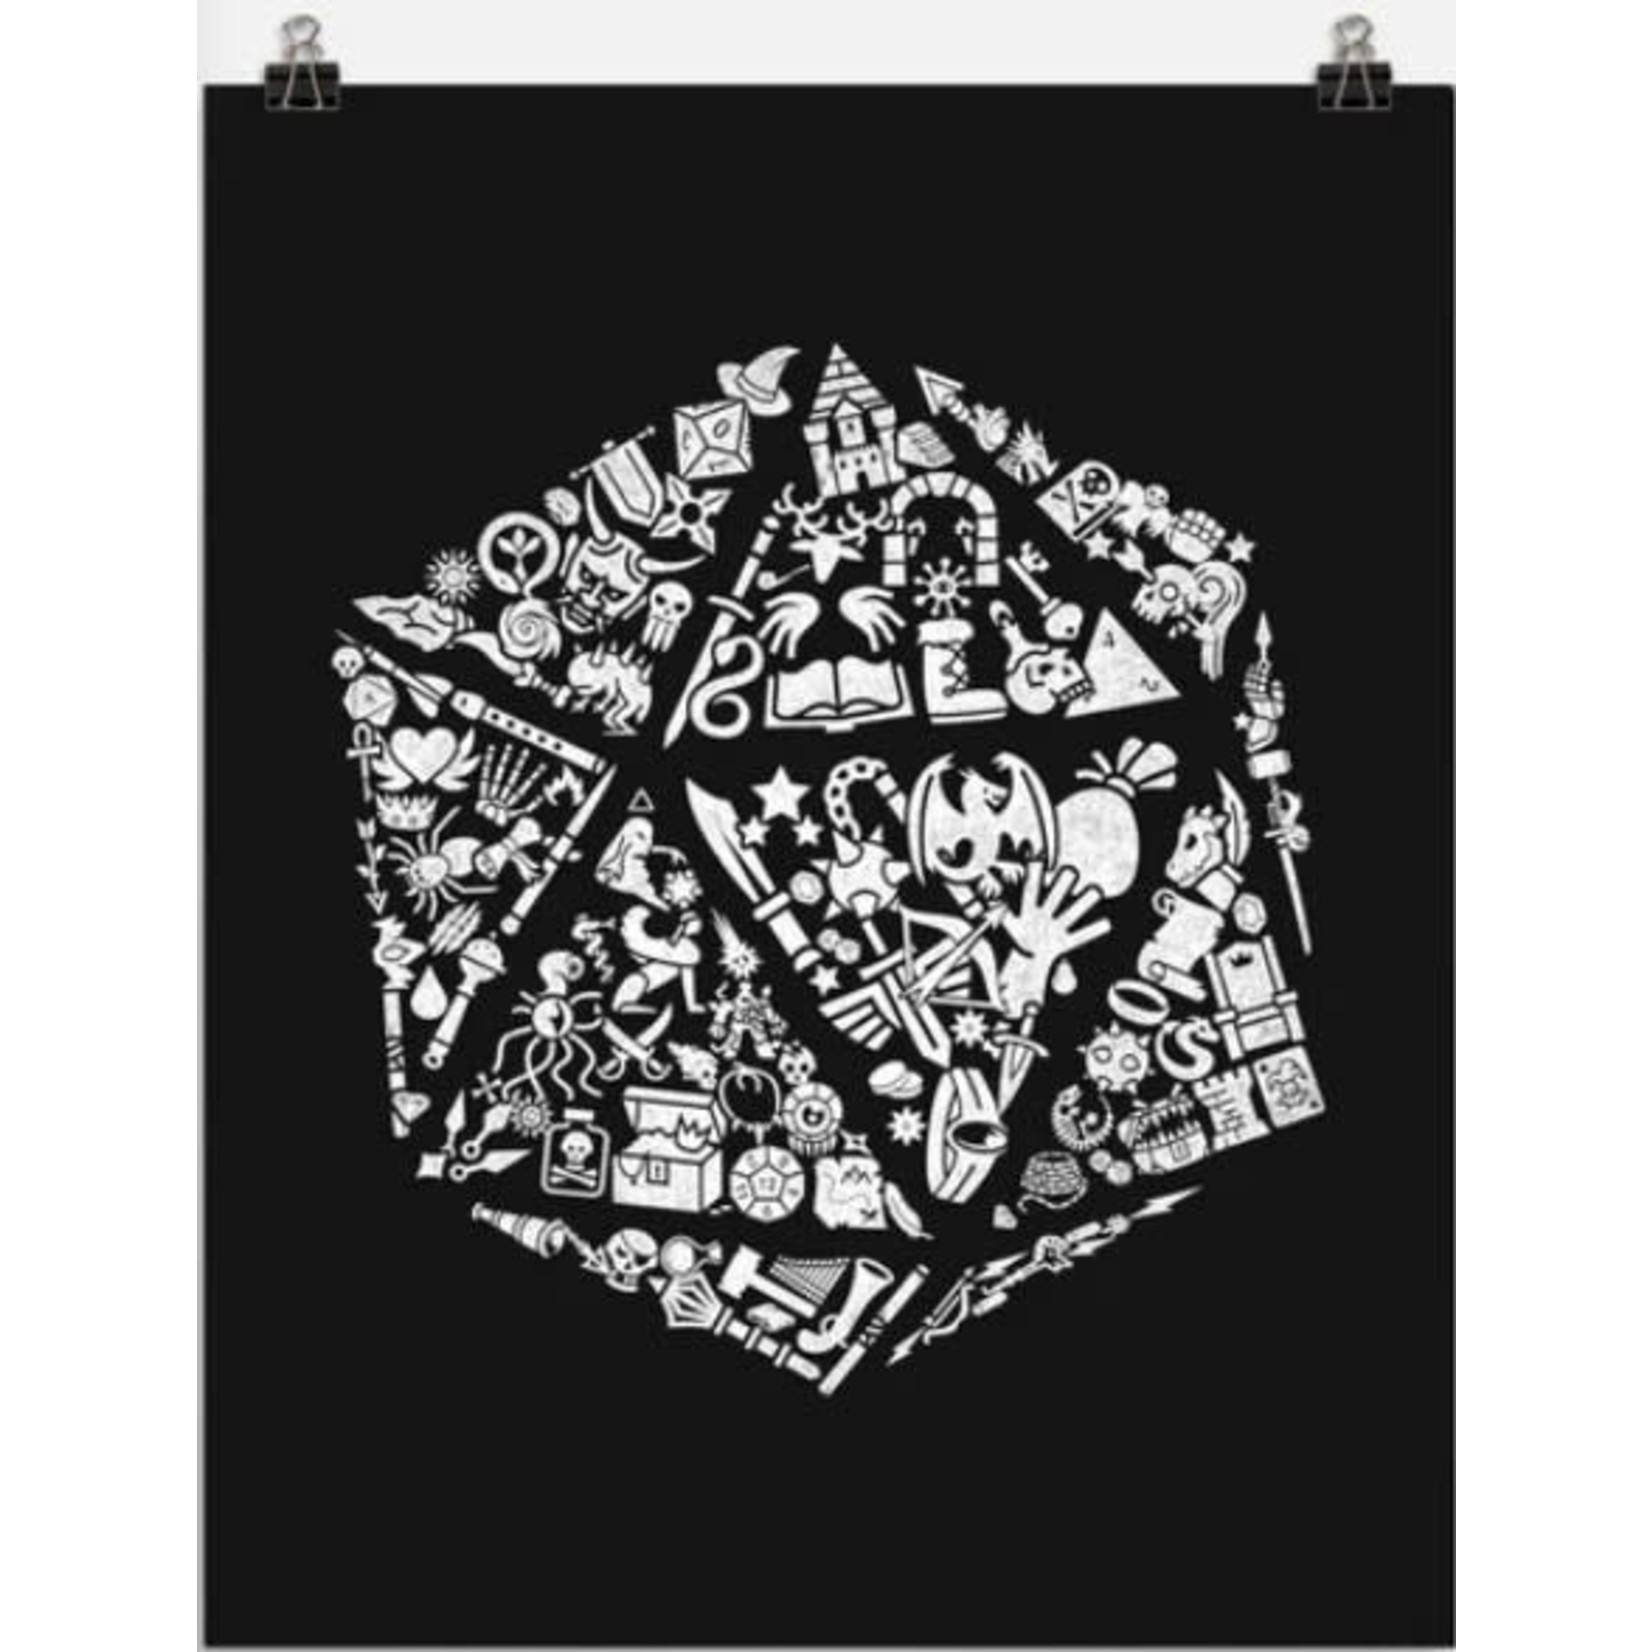 TeeFury Clearance Item (No Returns): Poster 24"x36": Dice Gamer